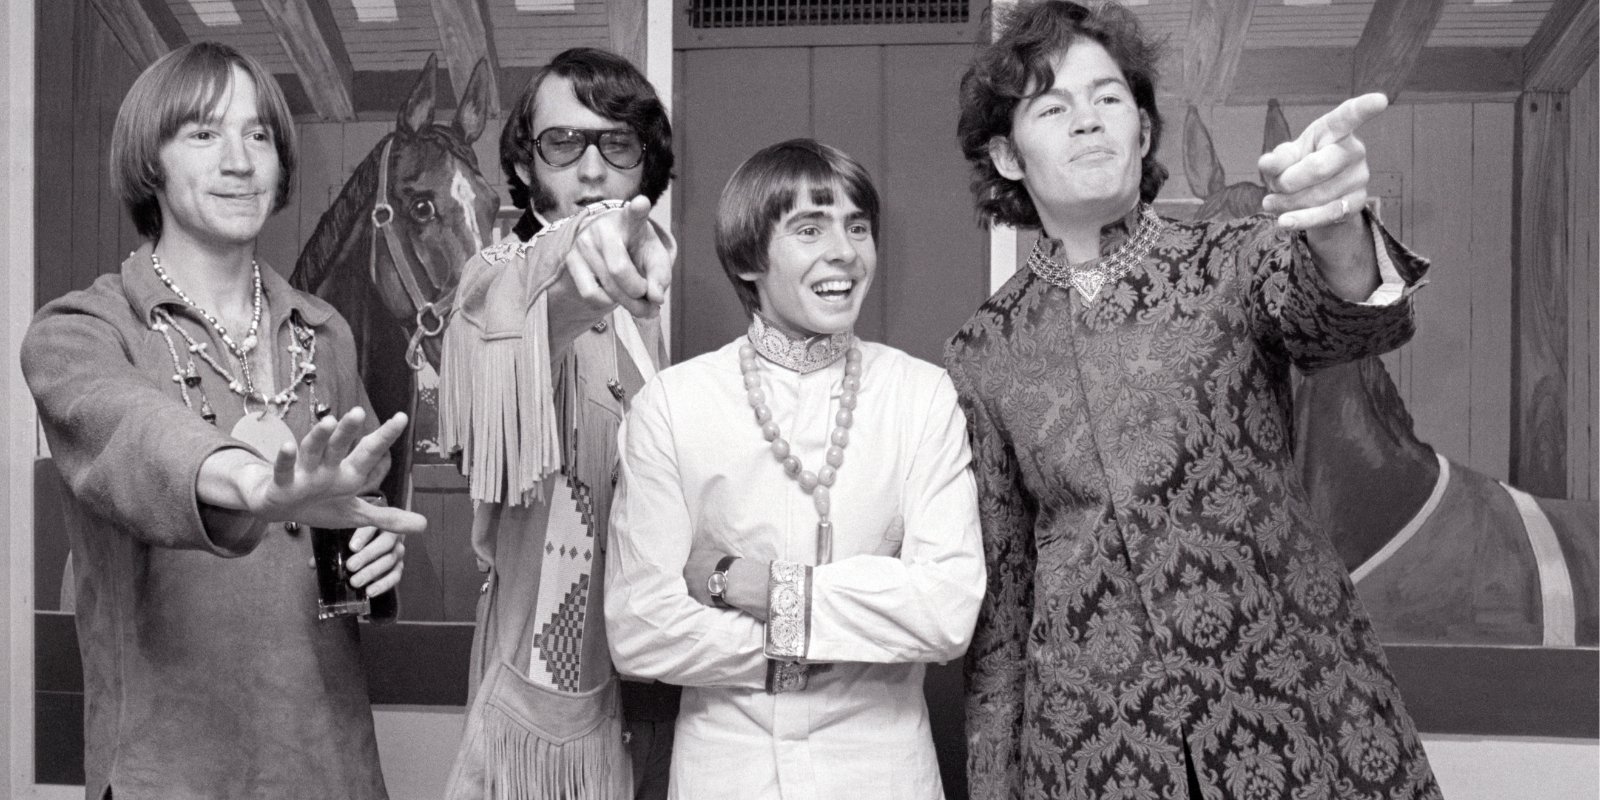 Peter Tork, Mike Nesmith, Davy Jones, and Micky Dolenz starred in the television series 'The Monkees' and they taped a season 2 episode in Paris in 1967.